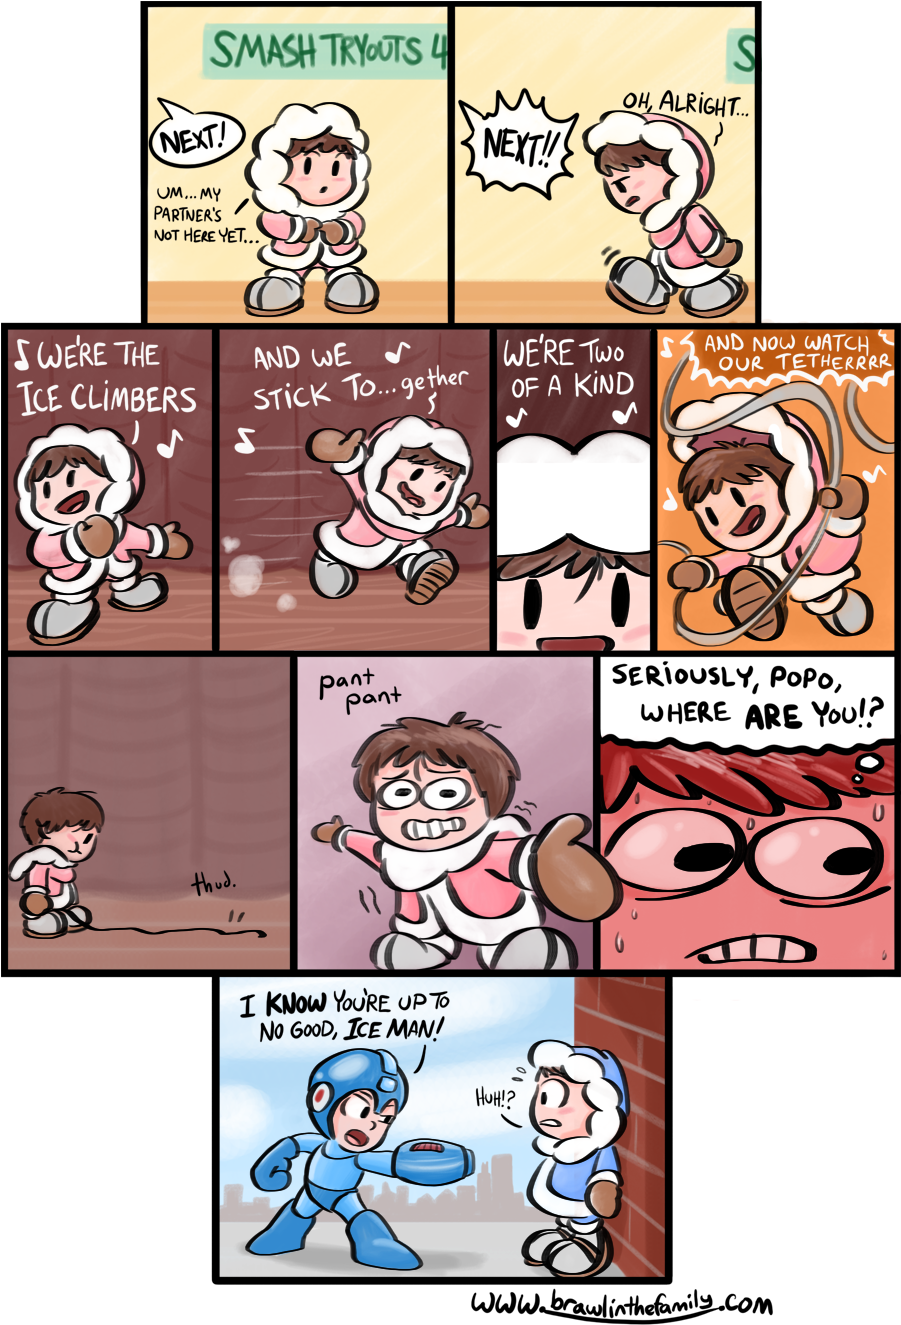 Smash Tryouts4 Oh, Alright - Super Smash Bros Ice Climbers Comic (900x1332)